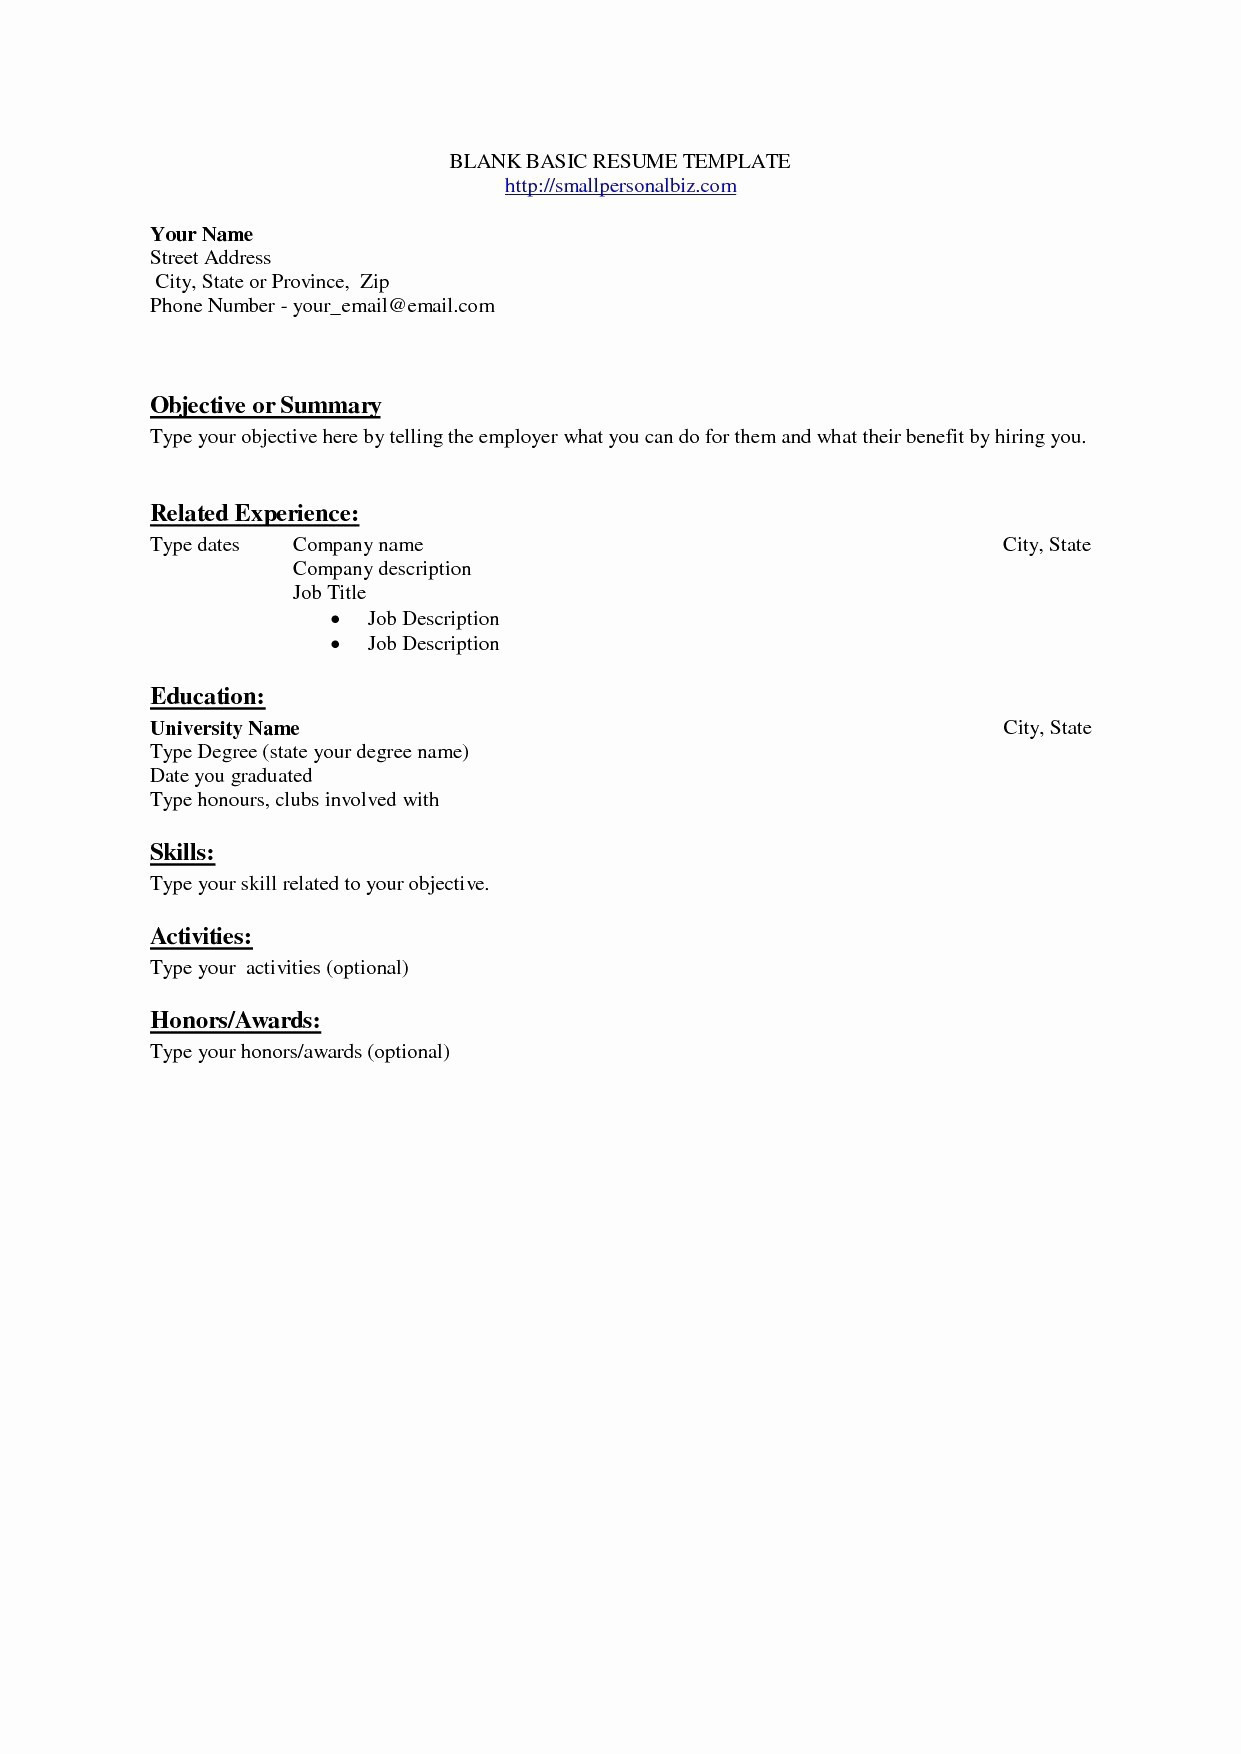 How To Type A Resume How To Type A Resume Sample How To Type A Cover Letter For A Job New Resume Cover Letter Of How To Type A Resume how to type a resume|wikiresume.com